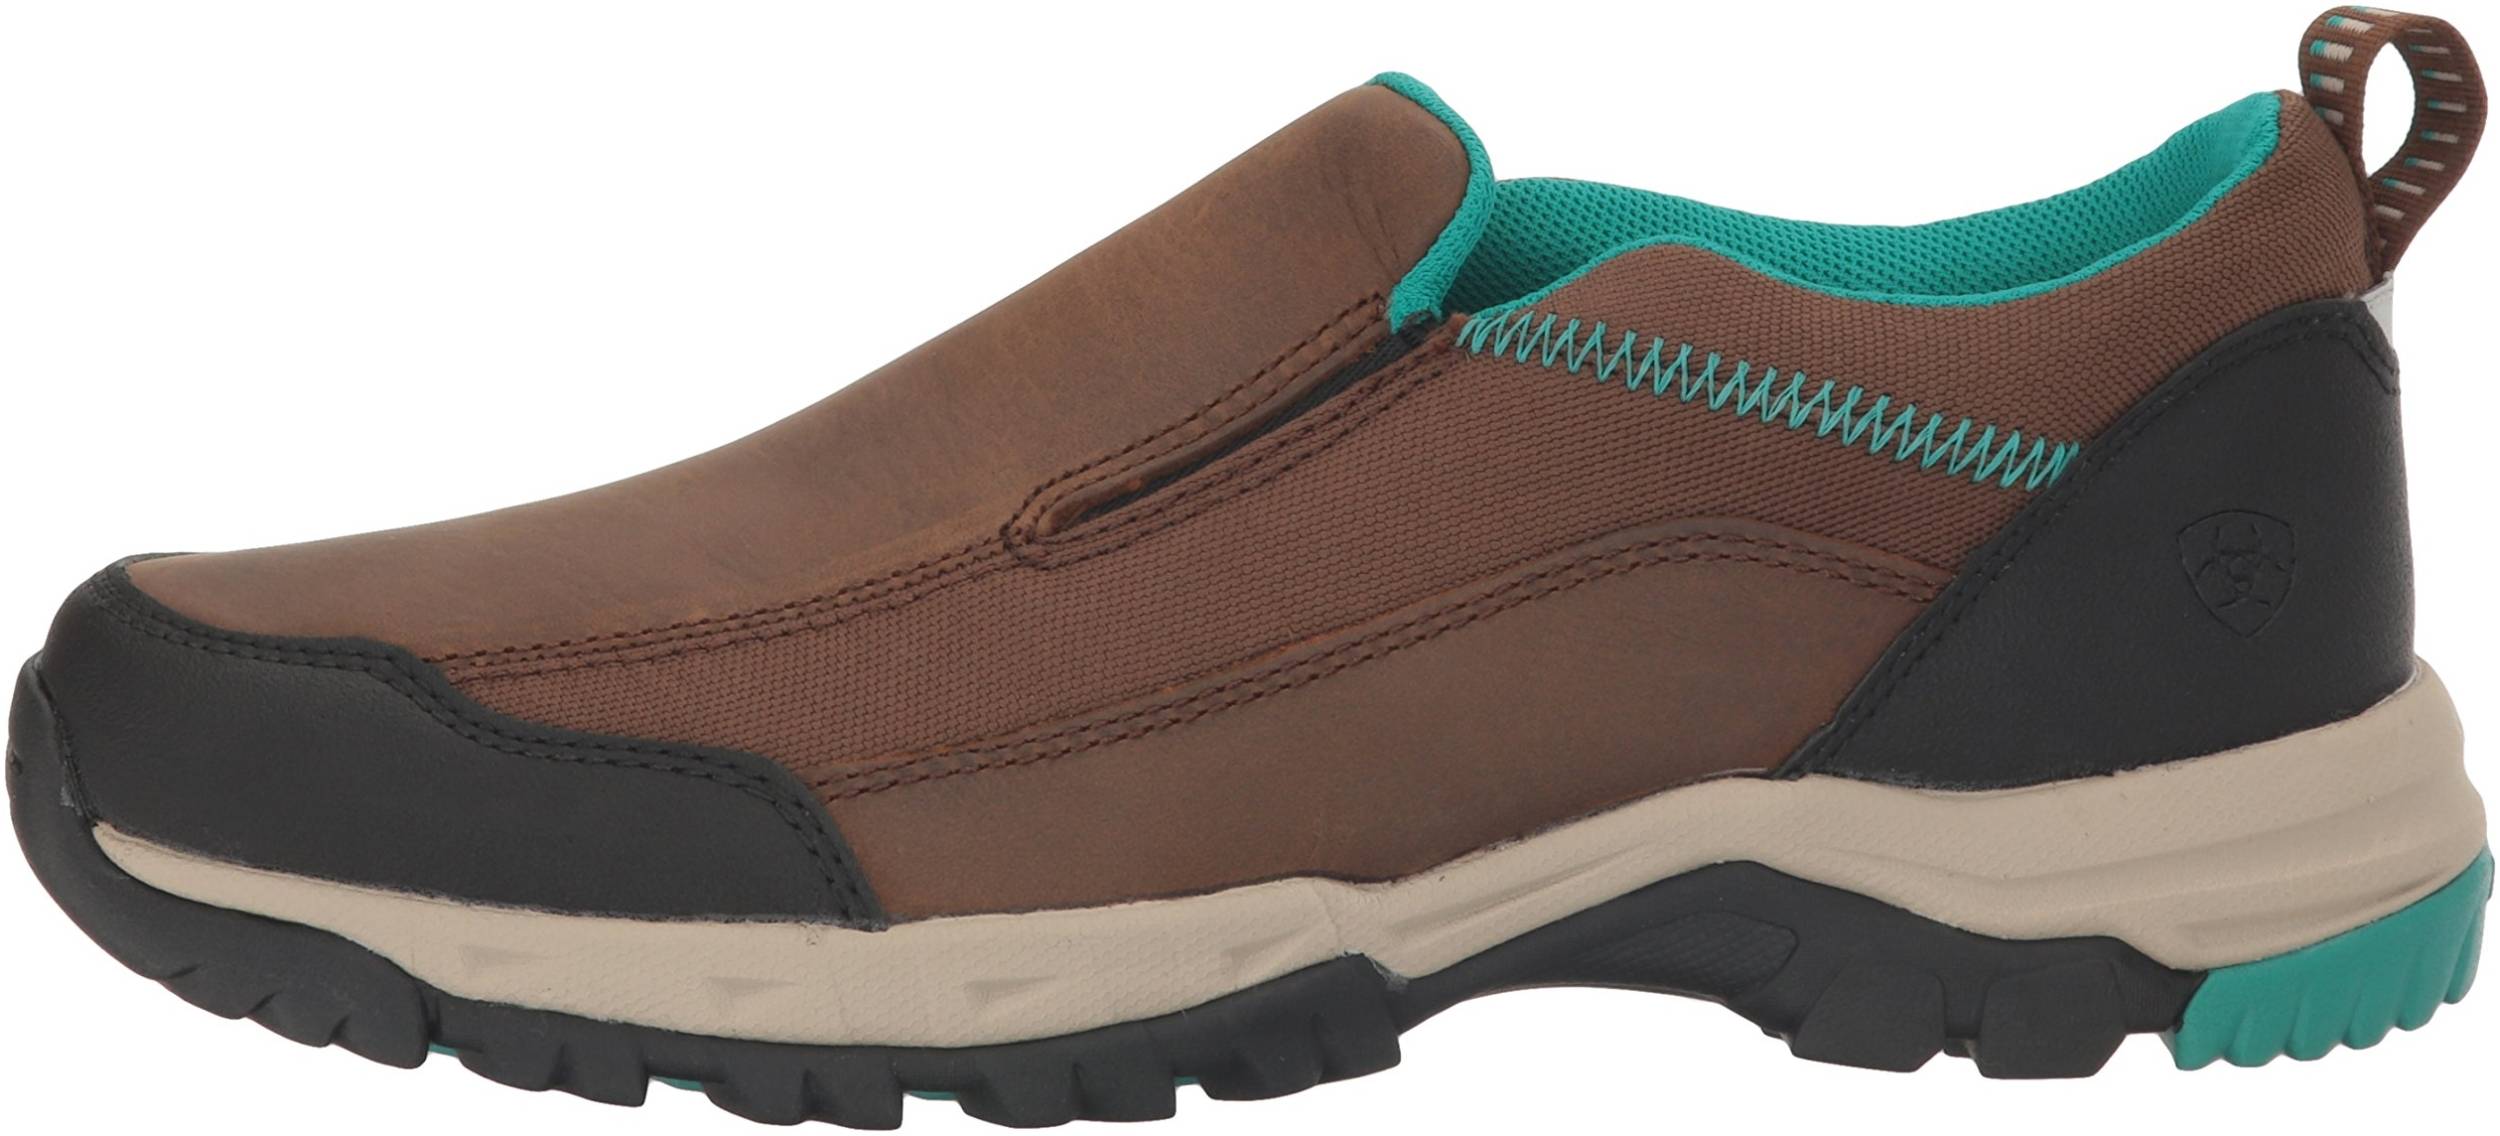 8 Slip on hiking shoes: Save up to 51% | RunRepeat